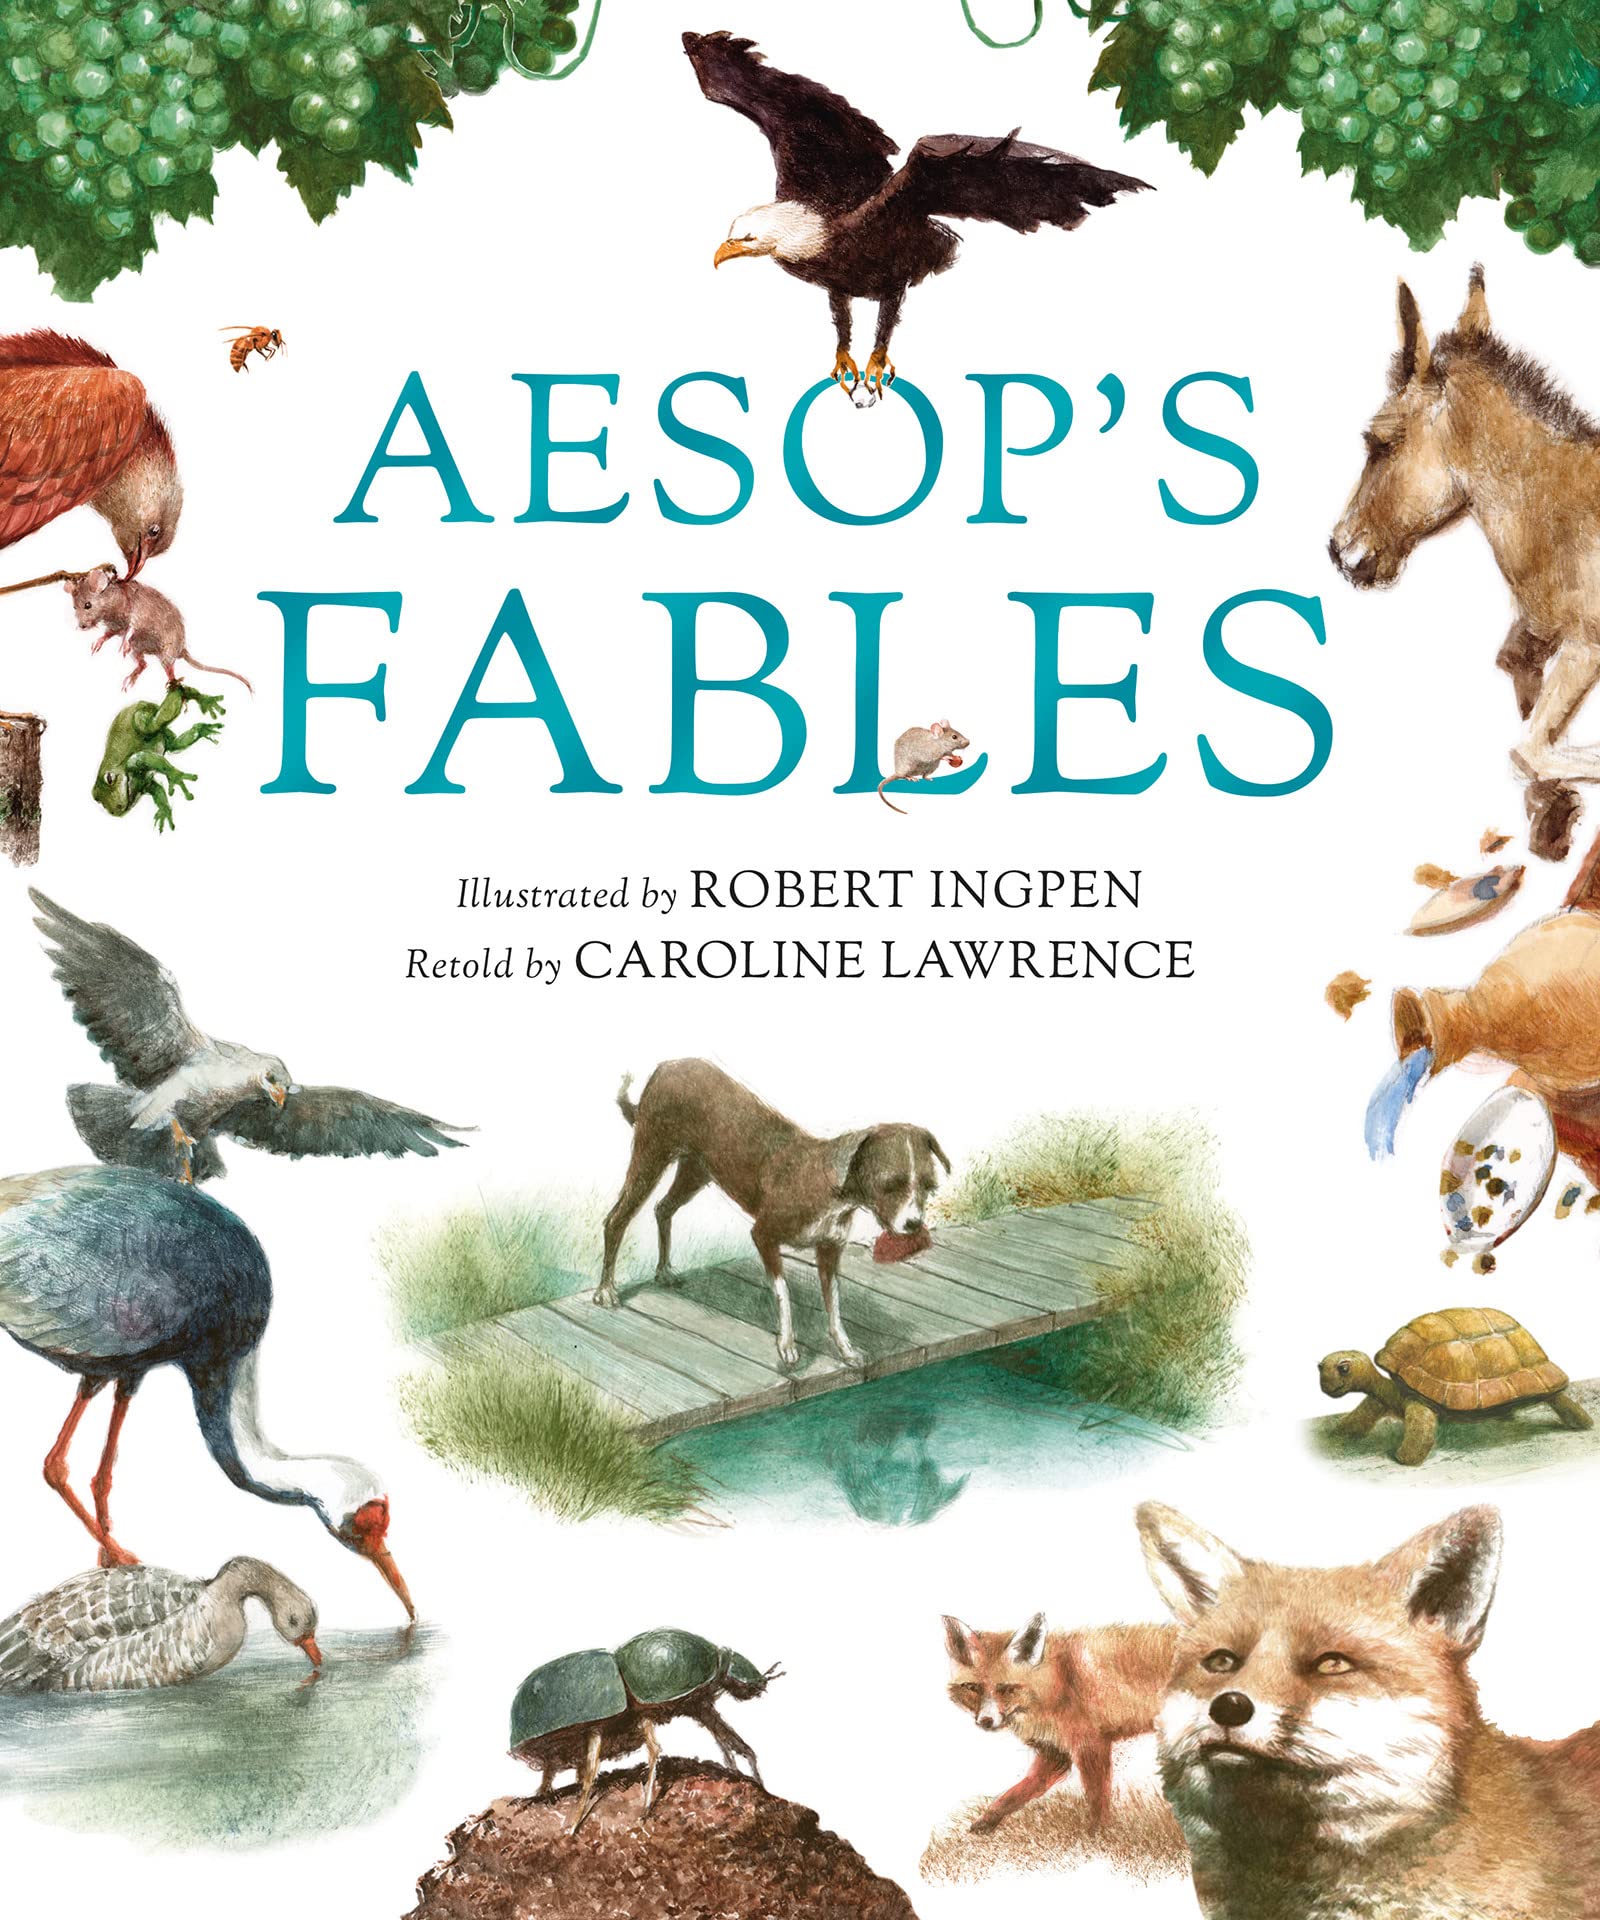 Aesops_fables_book